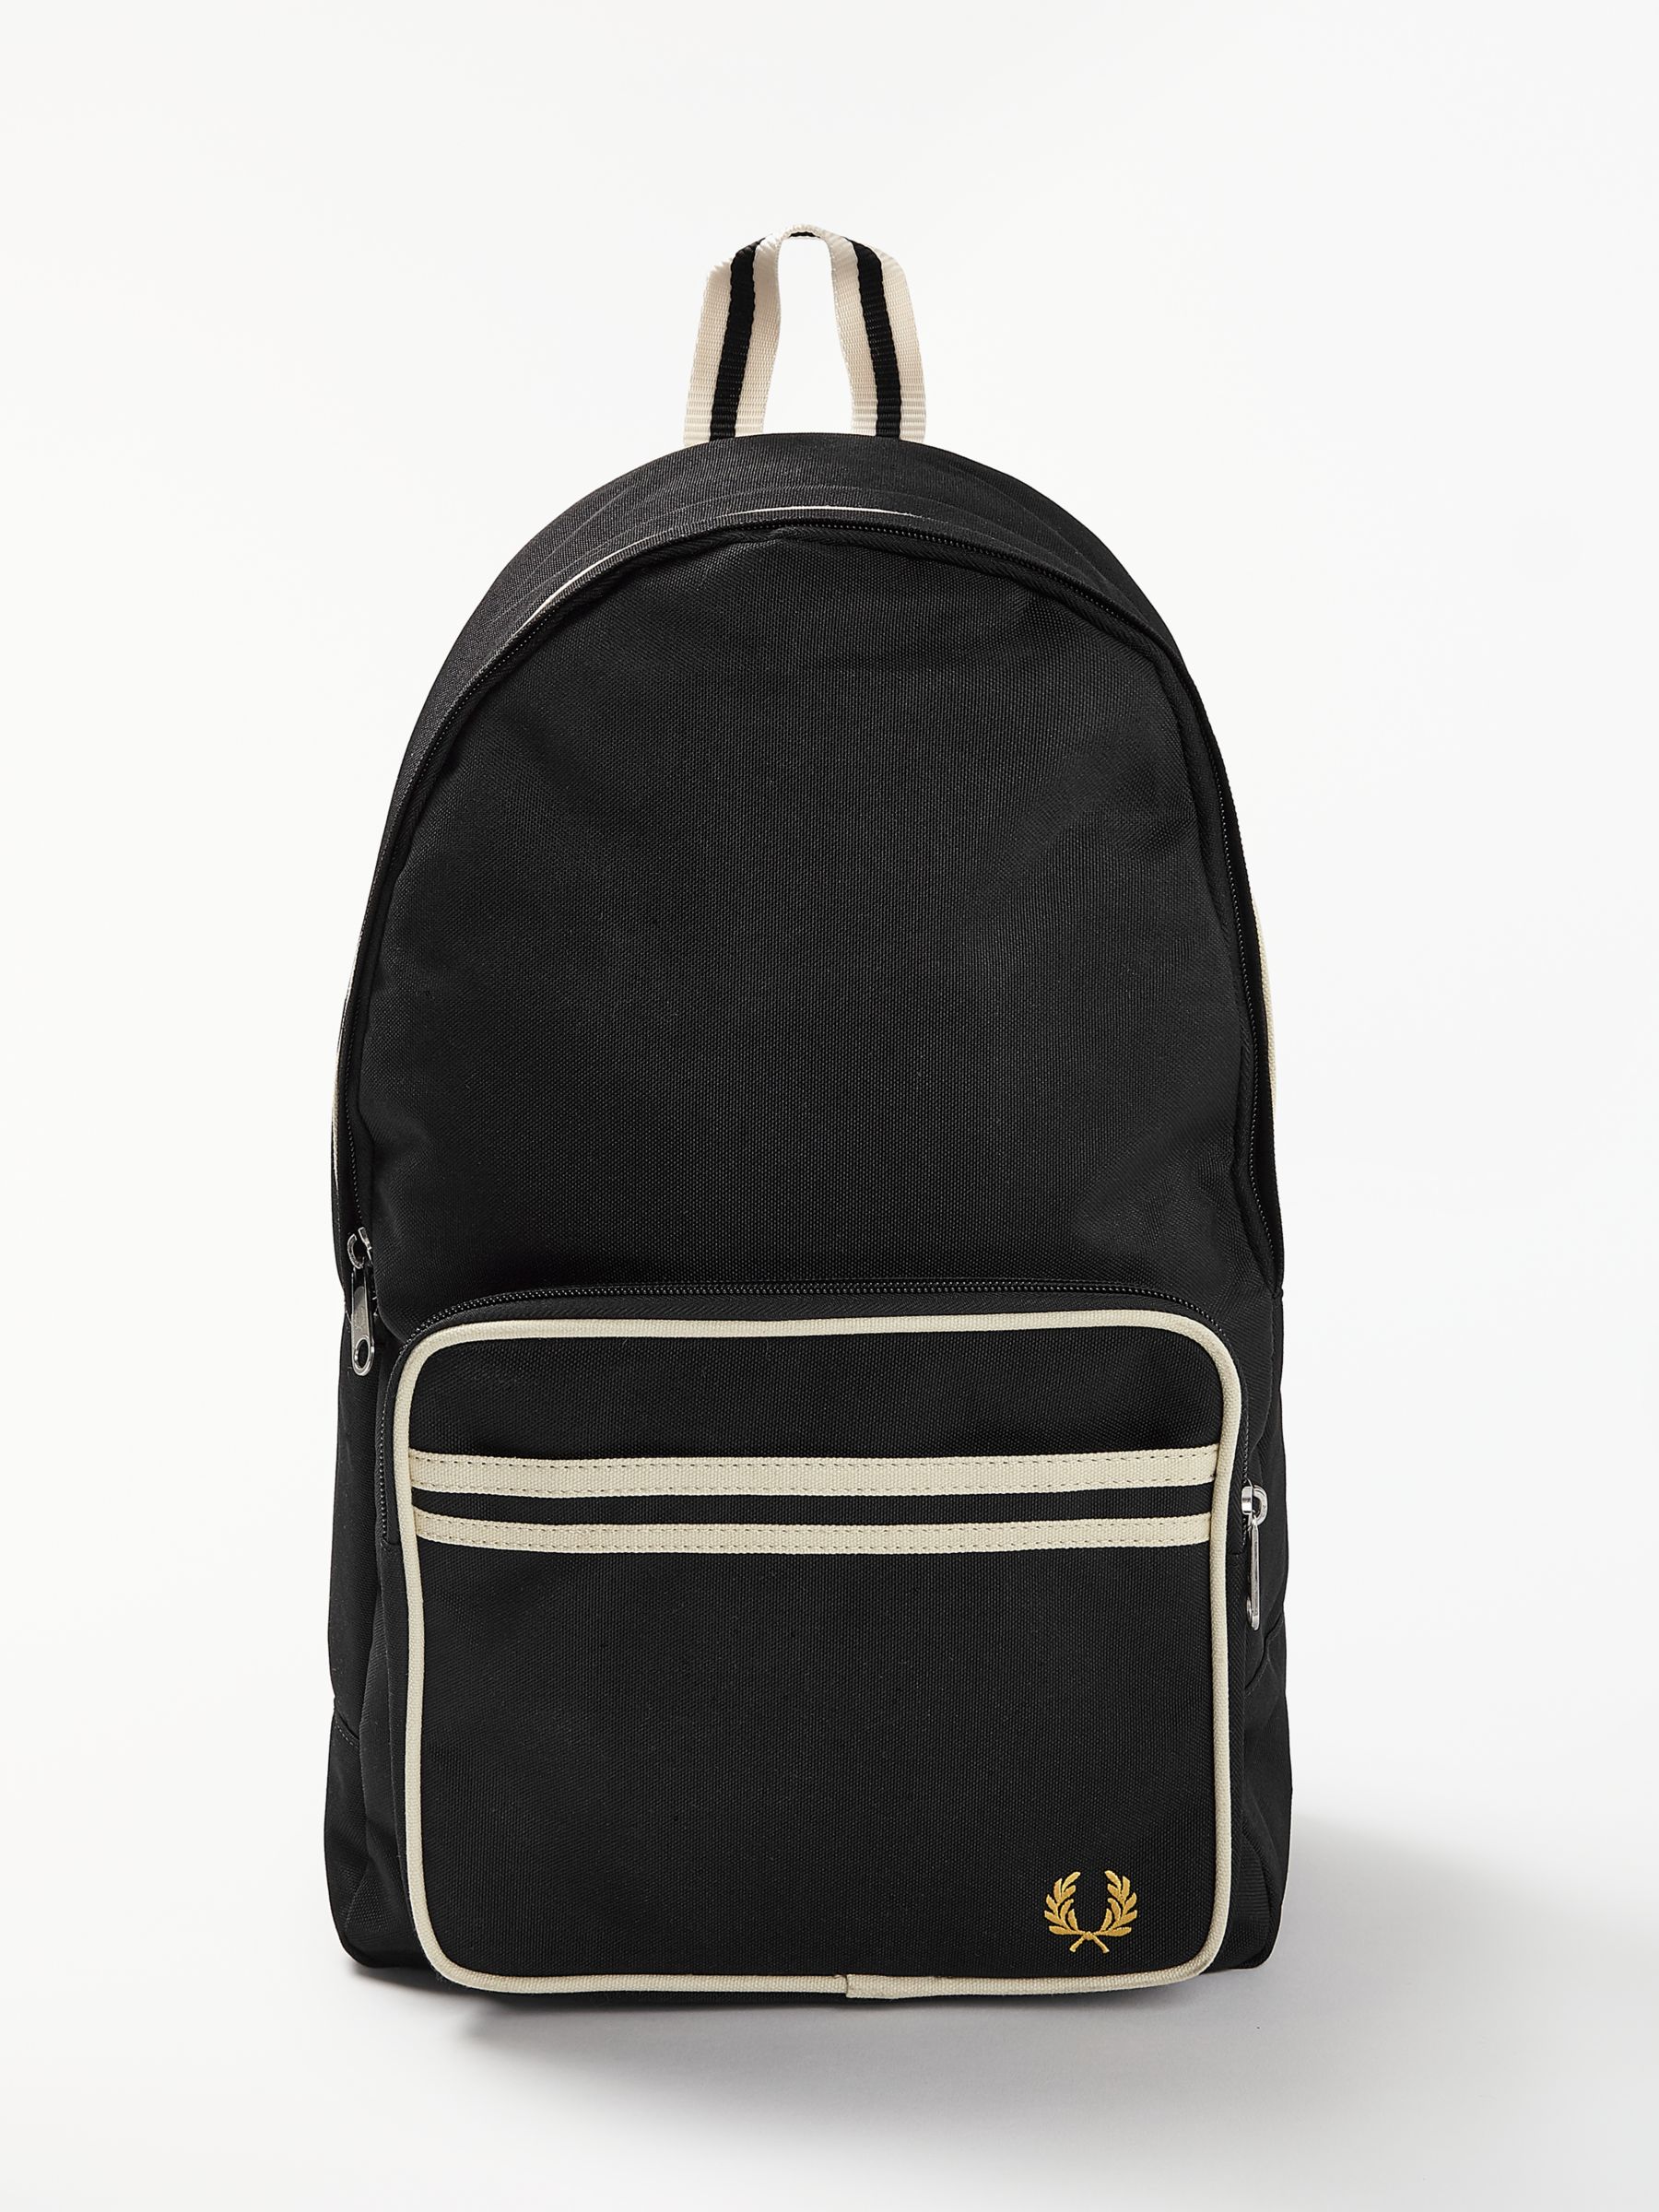 Fred Perry Twin Tipped Backpack, Black at John Lewis & Partners